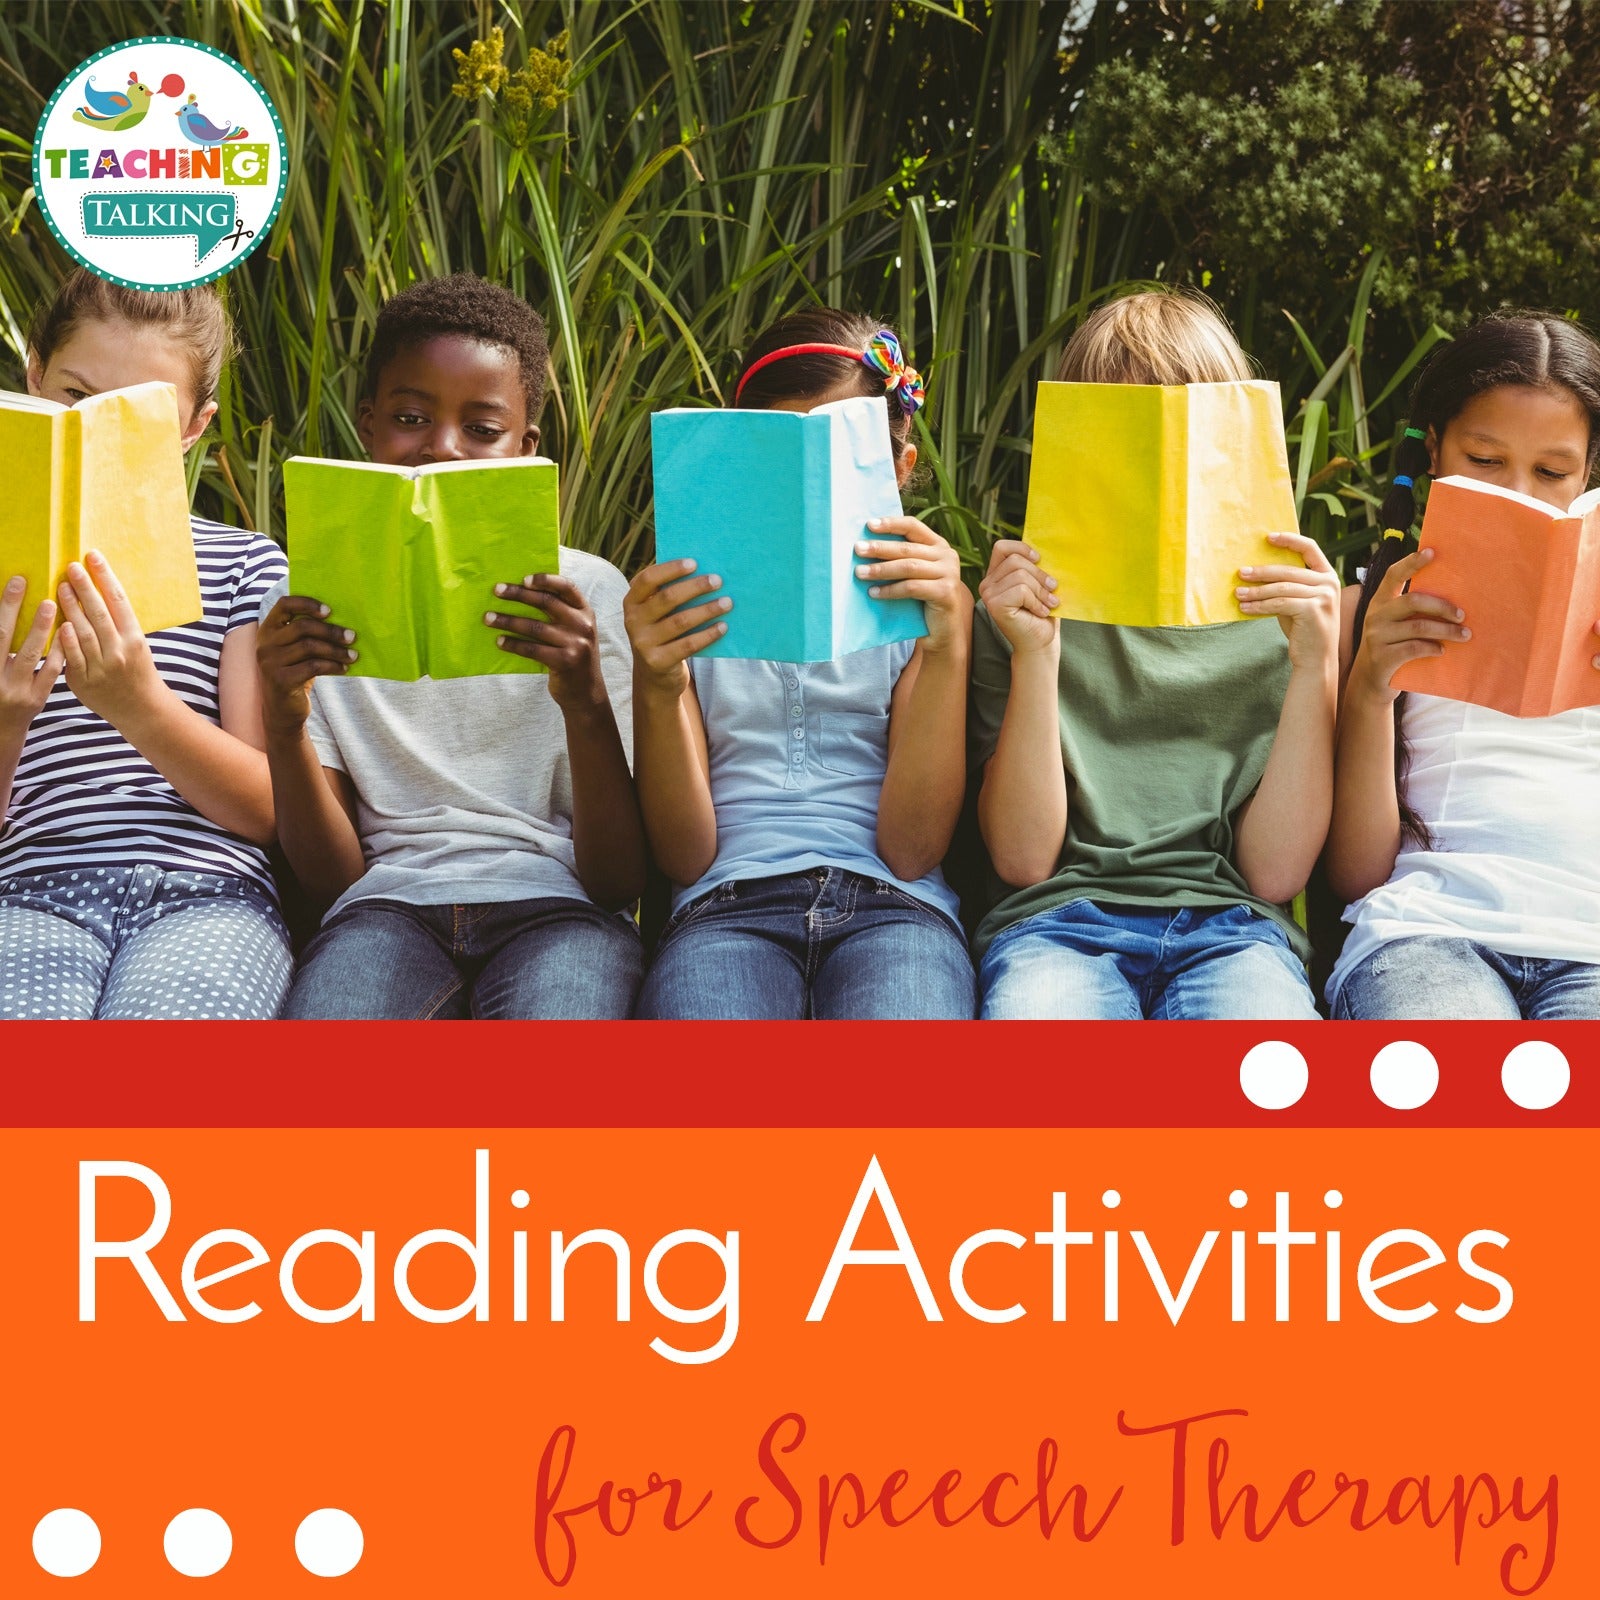 Reading Activities for speech therapy - square